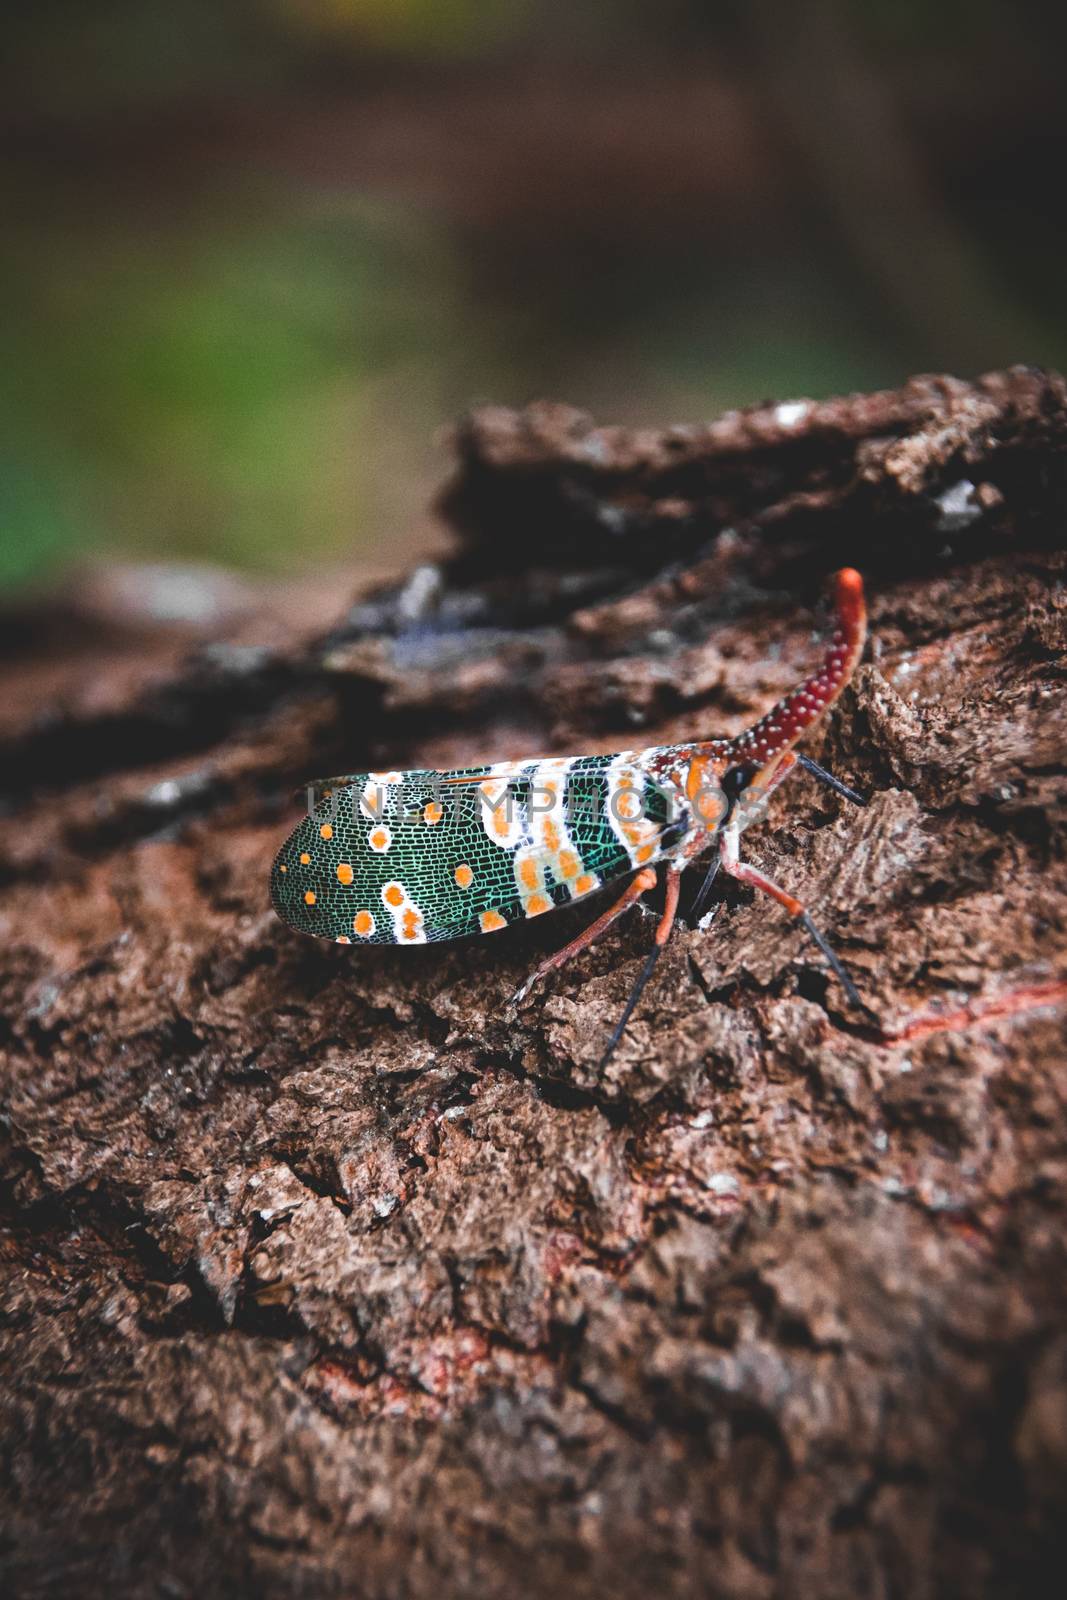 A Pyrops candelaria lanternfly spotted at Cuc Phuong National Park in Vietnam